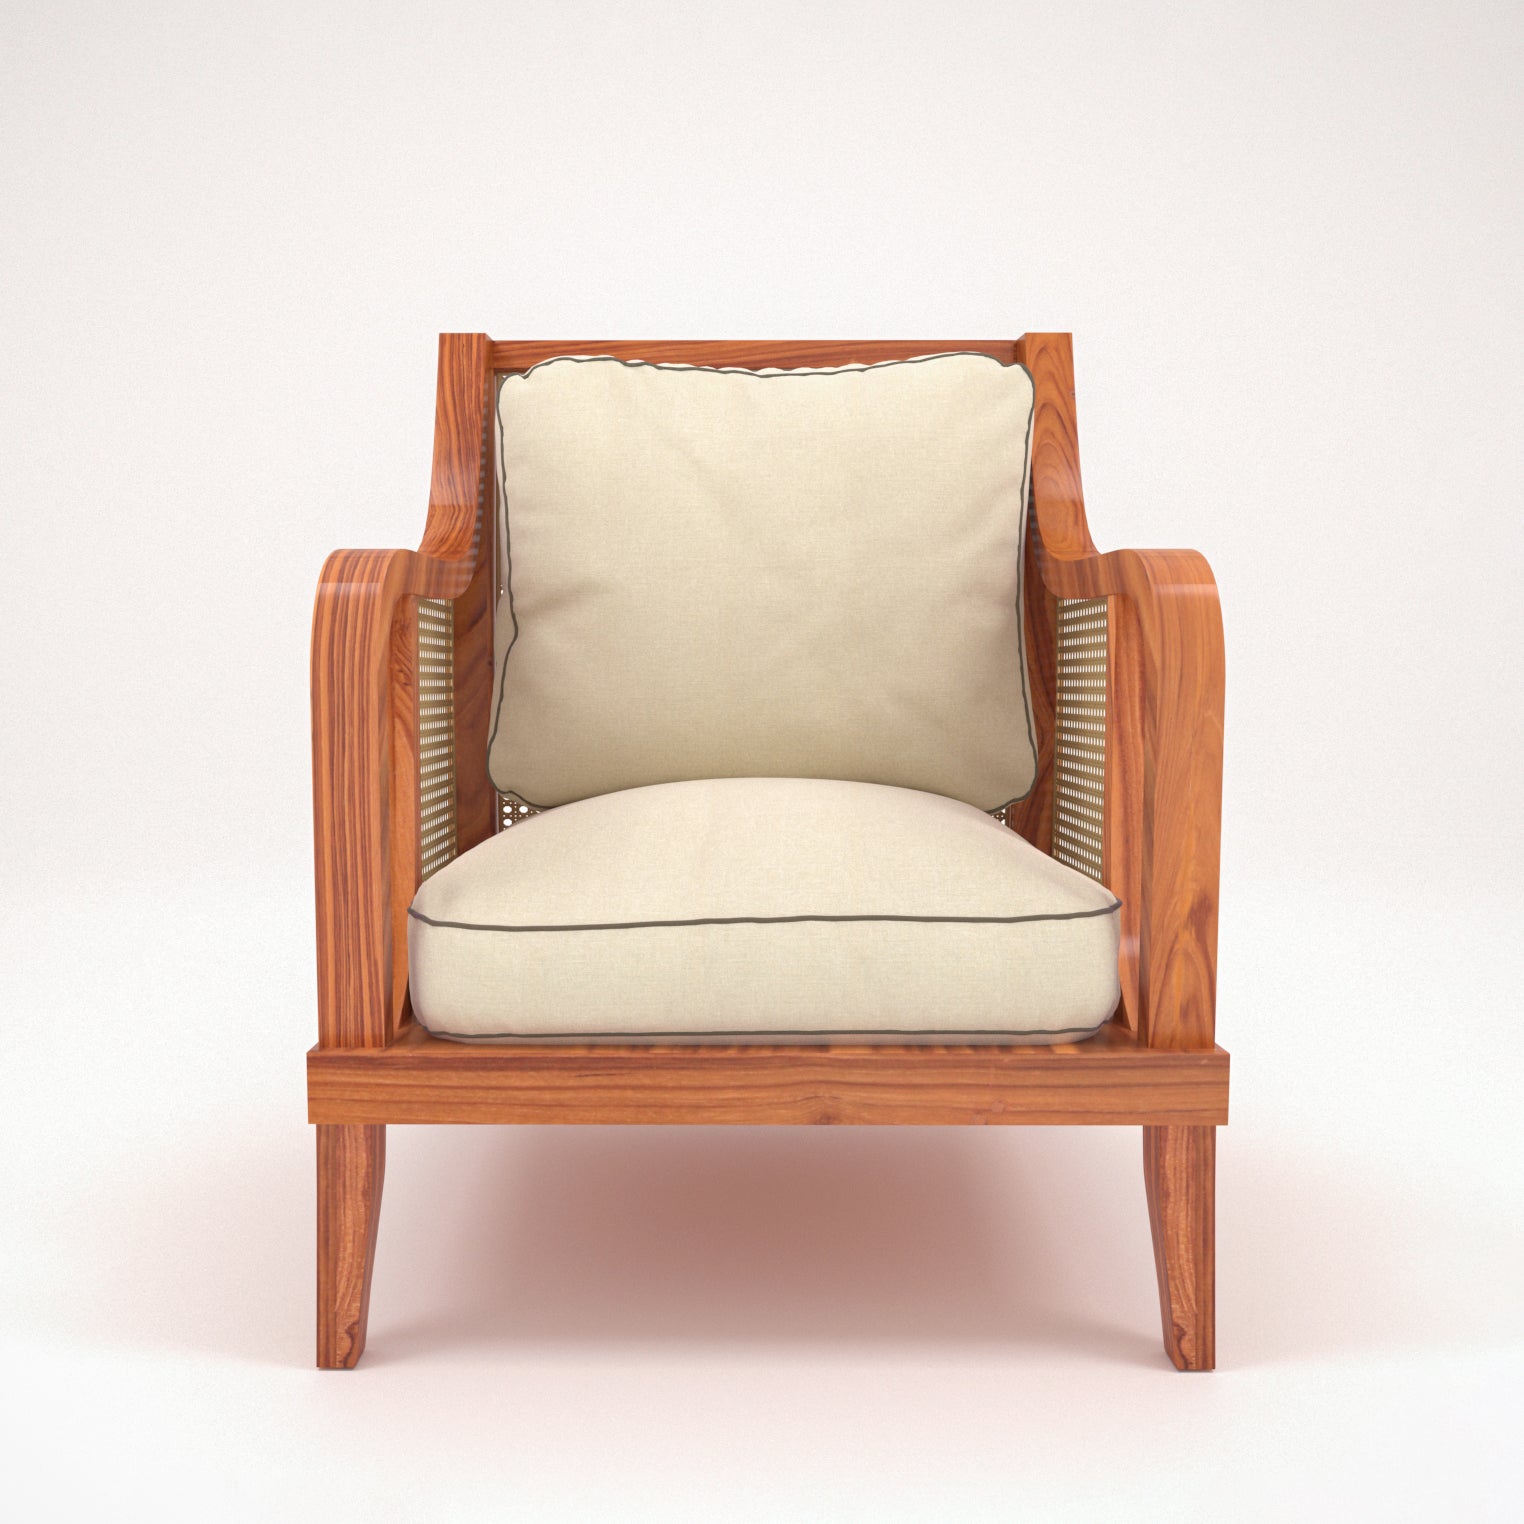 Solid Teak Comfy Upholstered Cane Chair Arm Chair